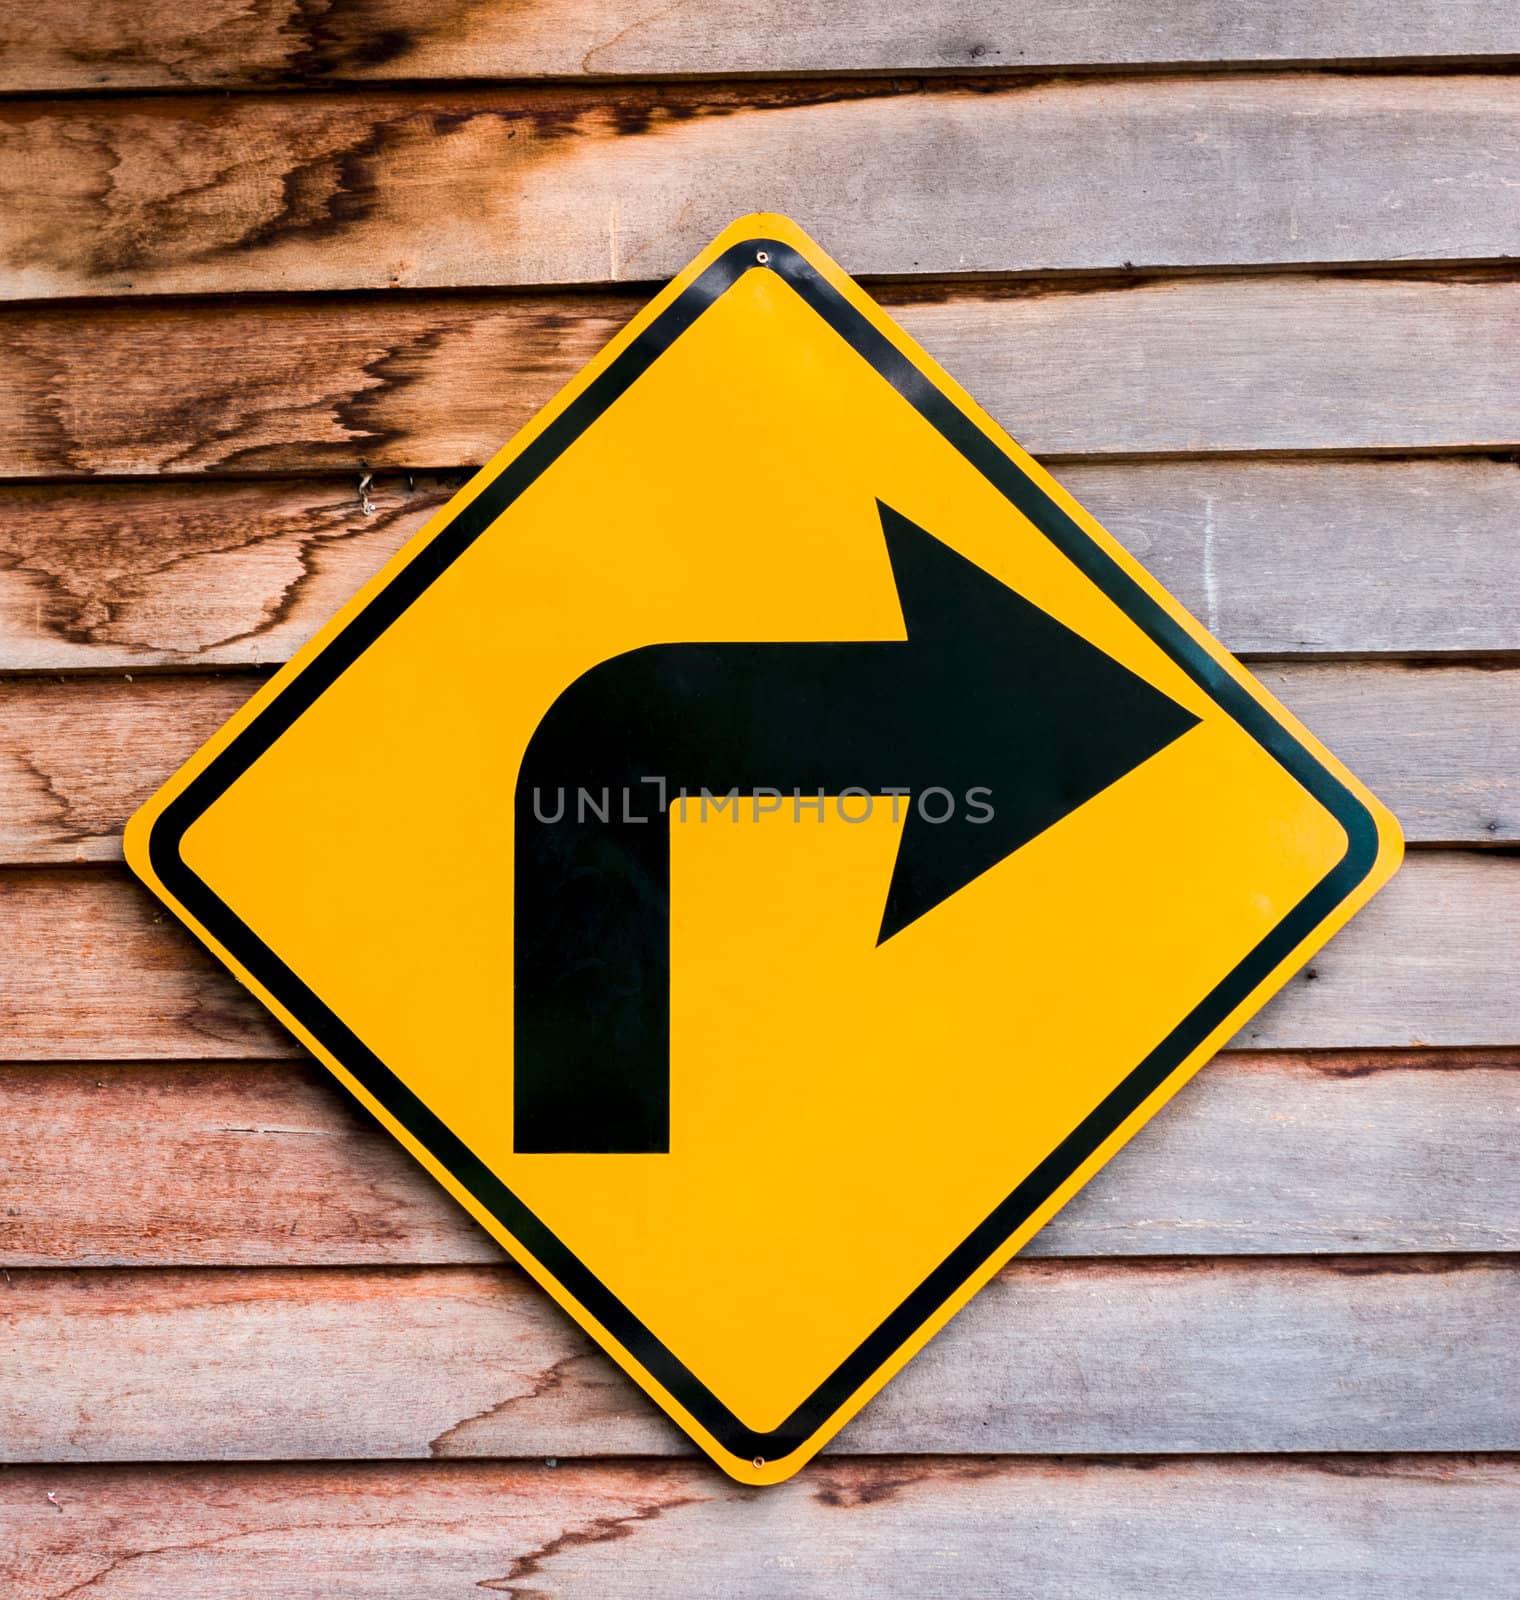 Yellow right turning traffic road sign on a wooden plank